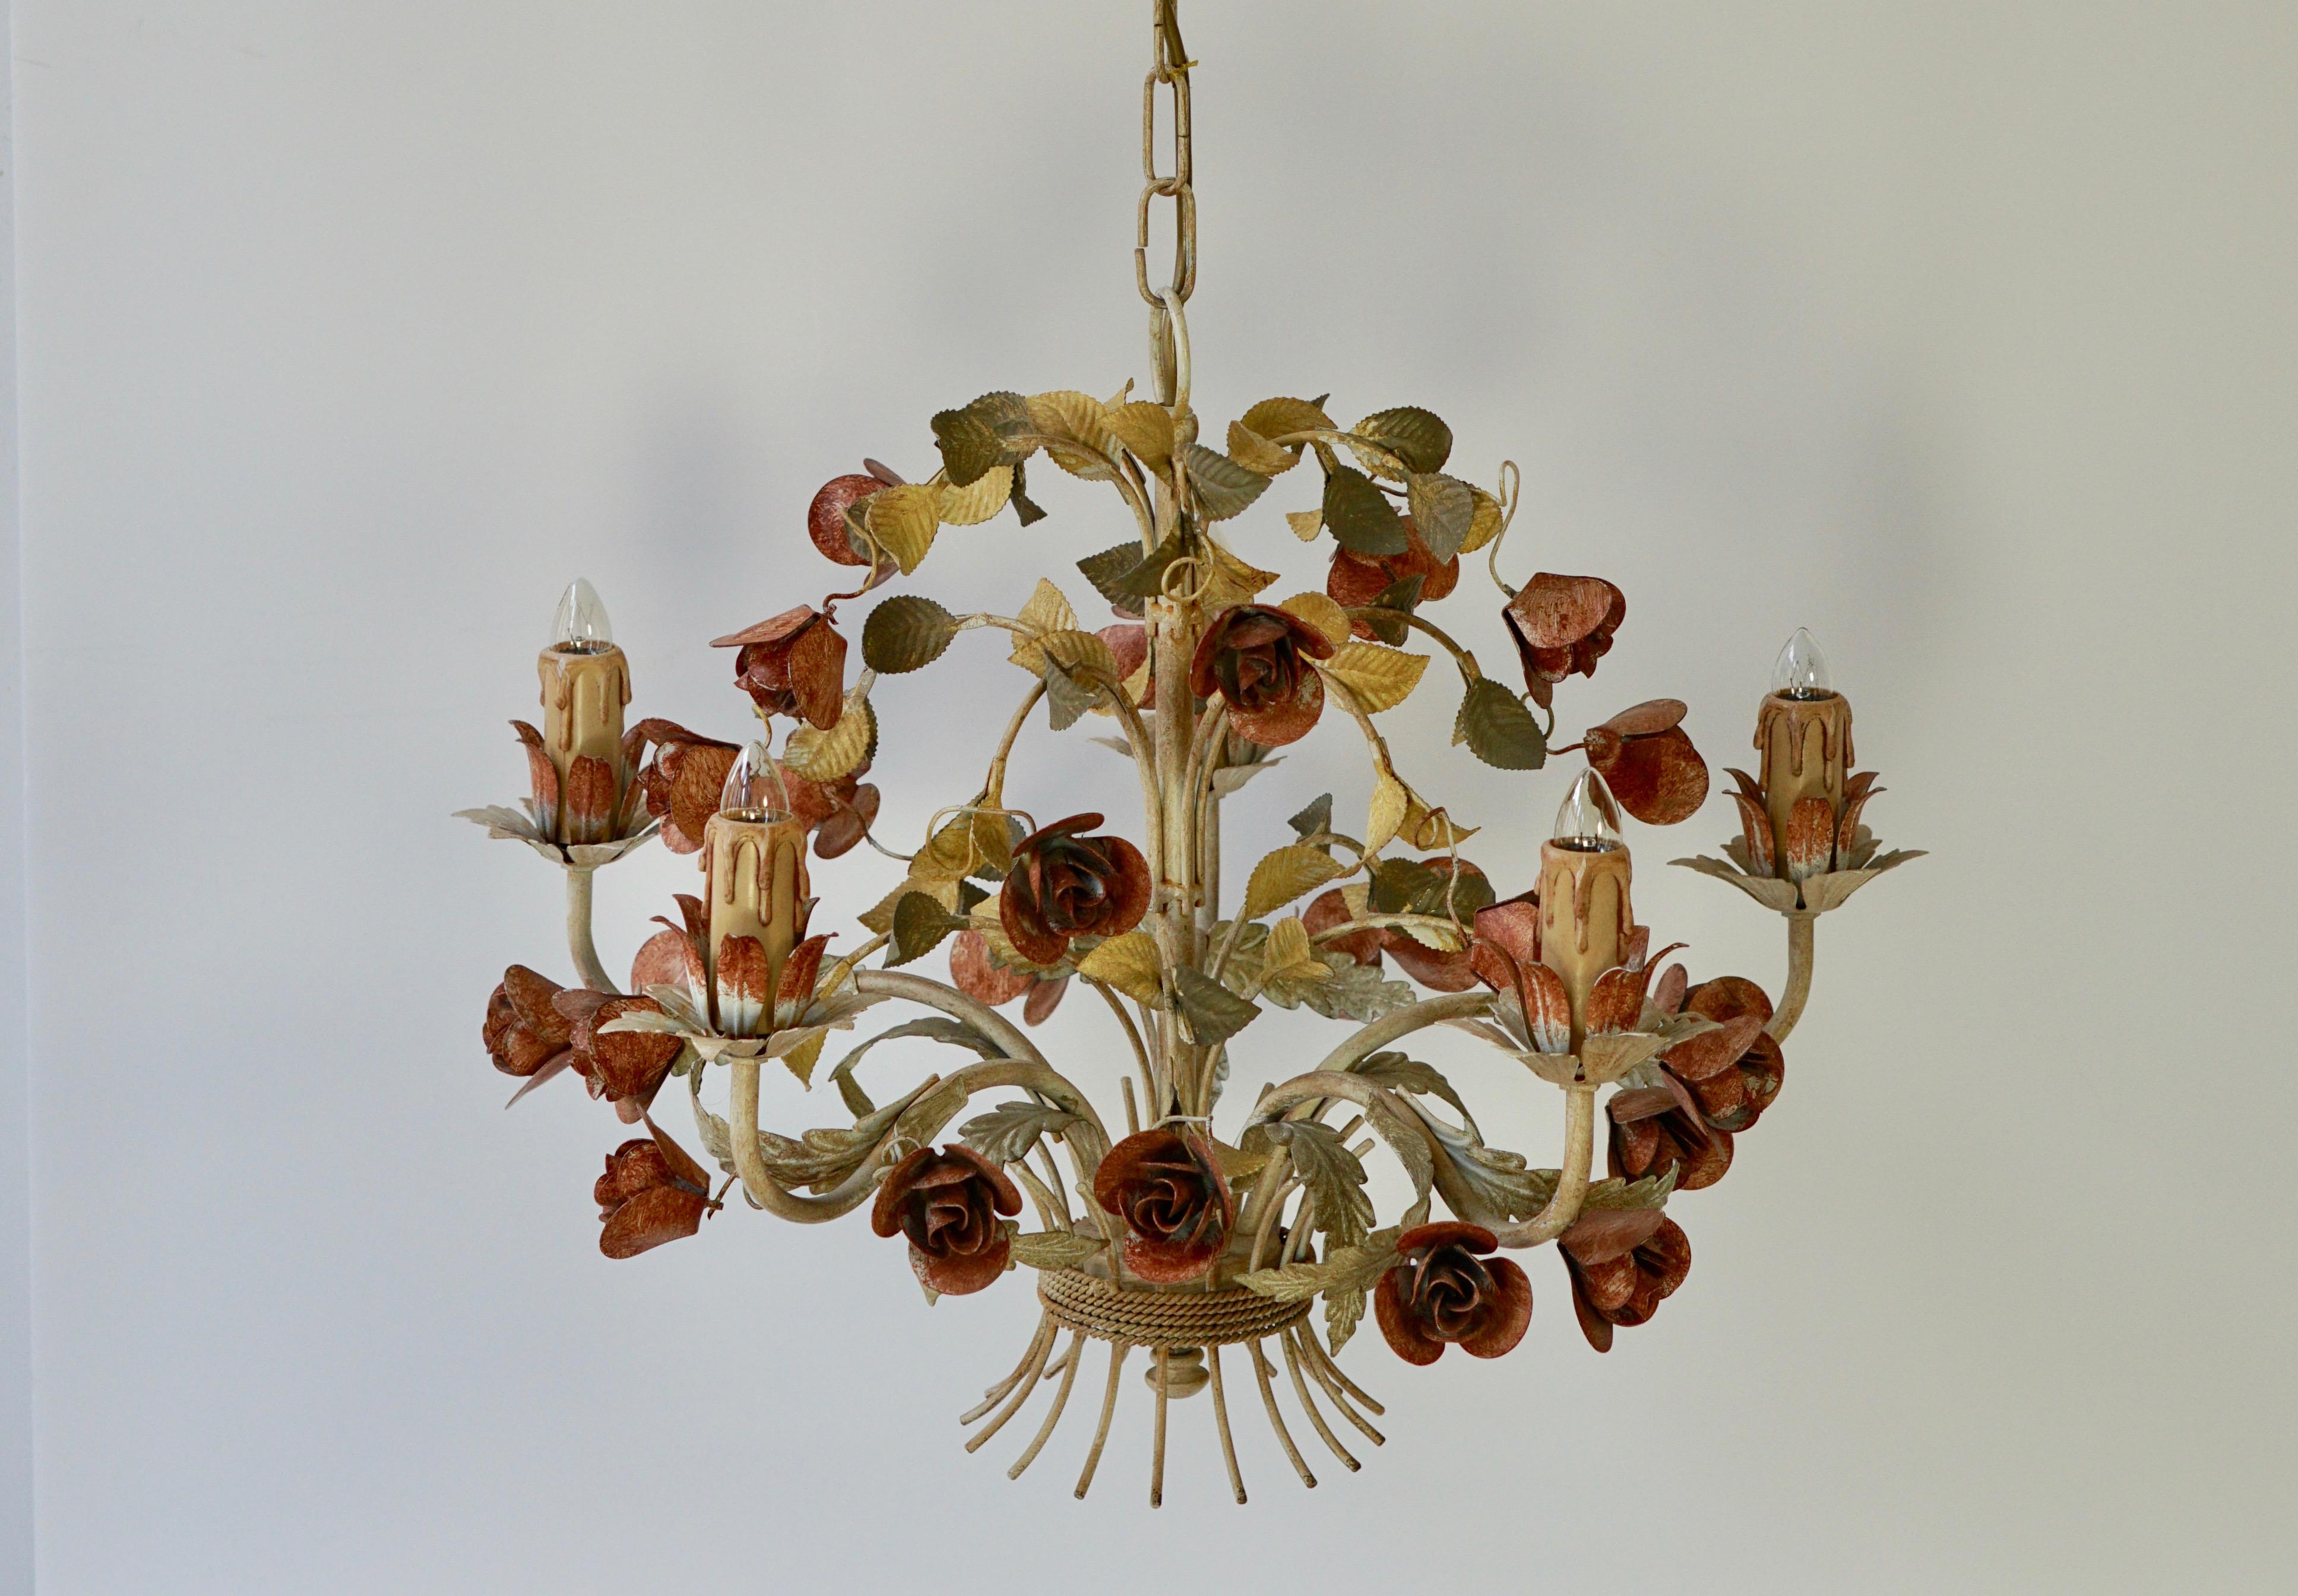 This elegant chandelier was crafted in Italy, circa 1960 -1970s. The charming hanging light fixture has five lights and is embellished with realistic flowers and green leaves. The round chandelier is in very good condition and has its original